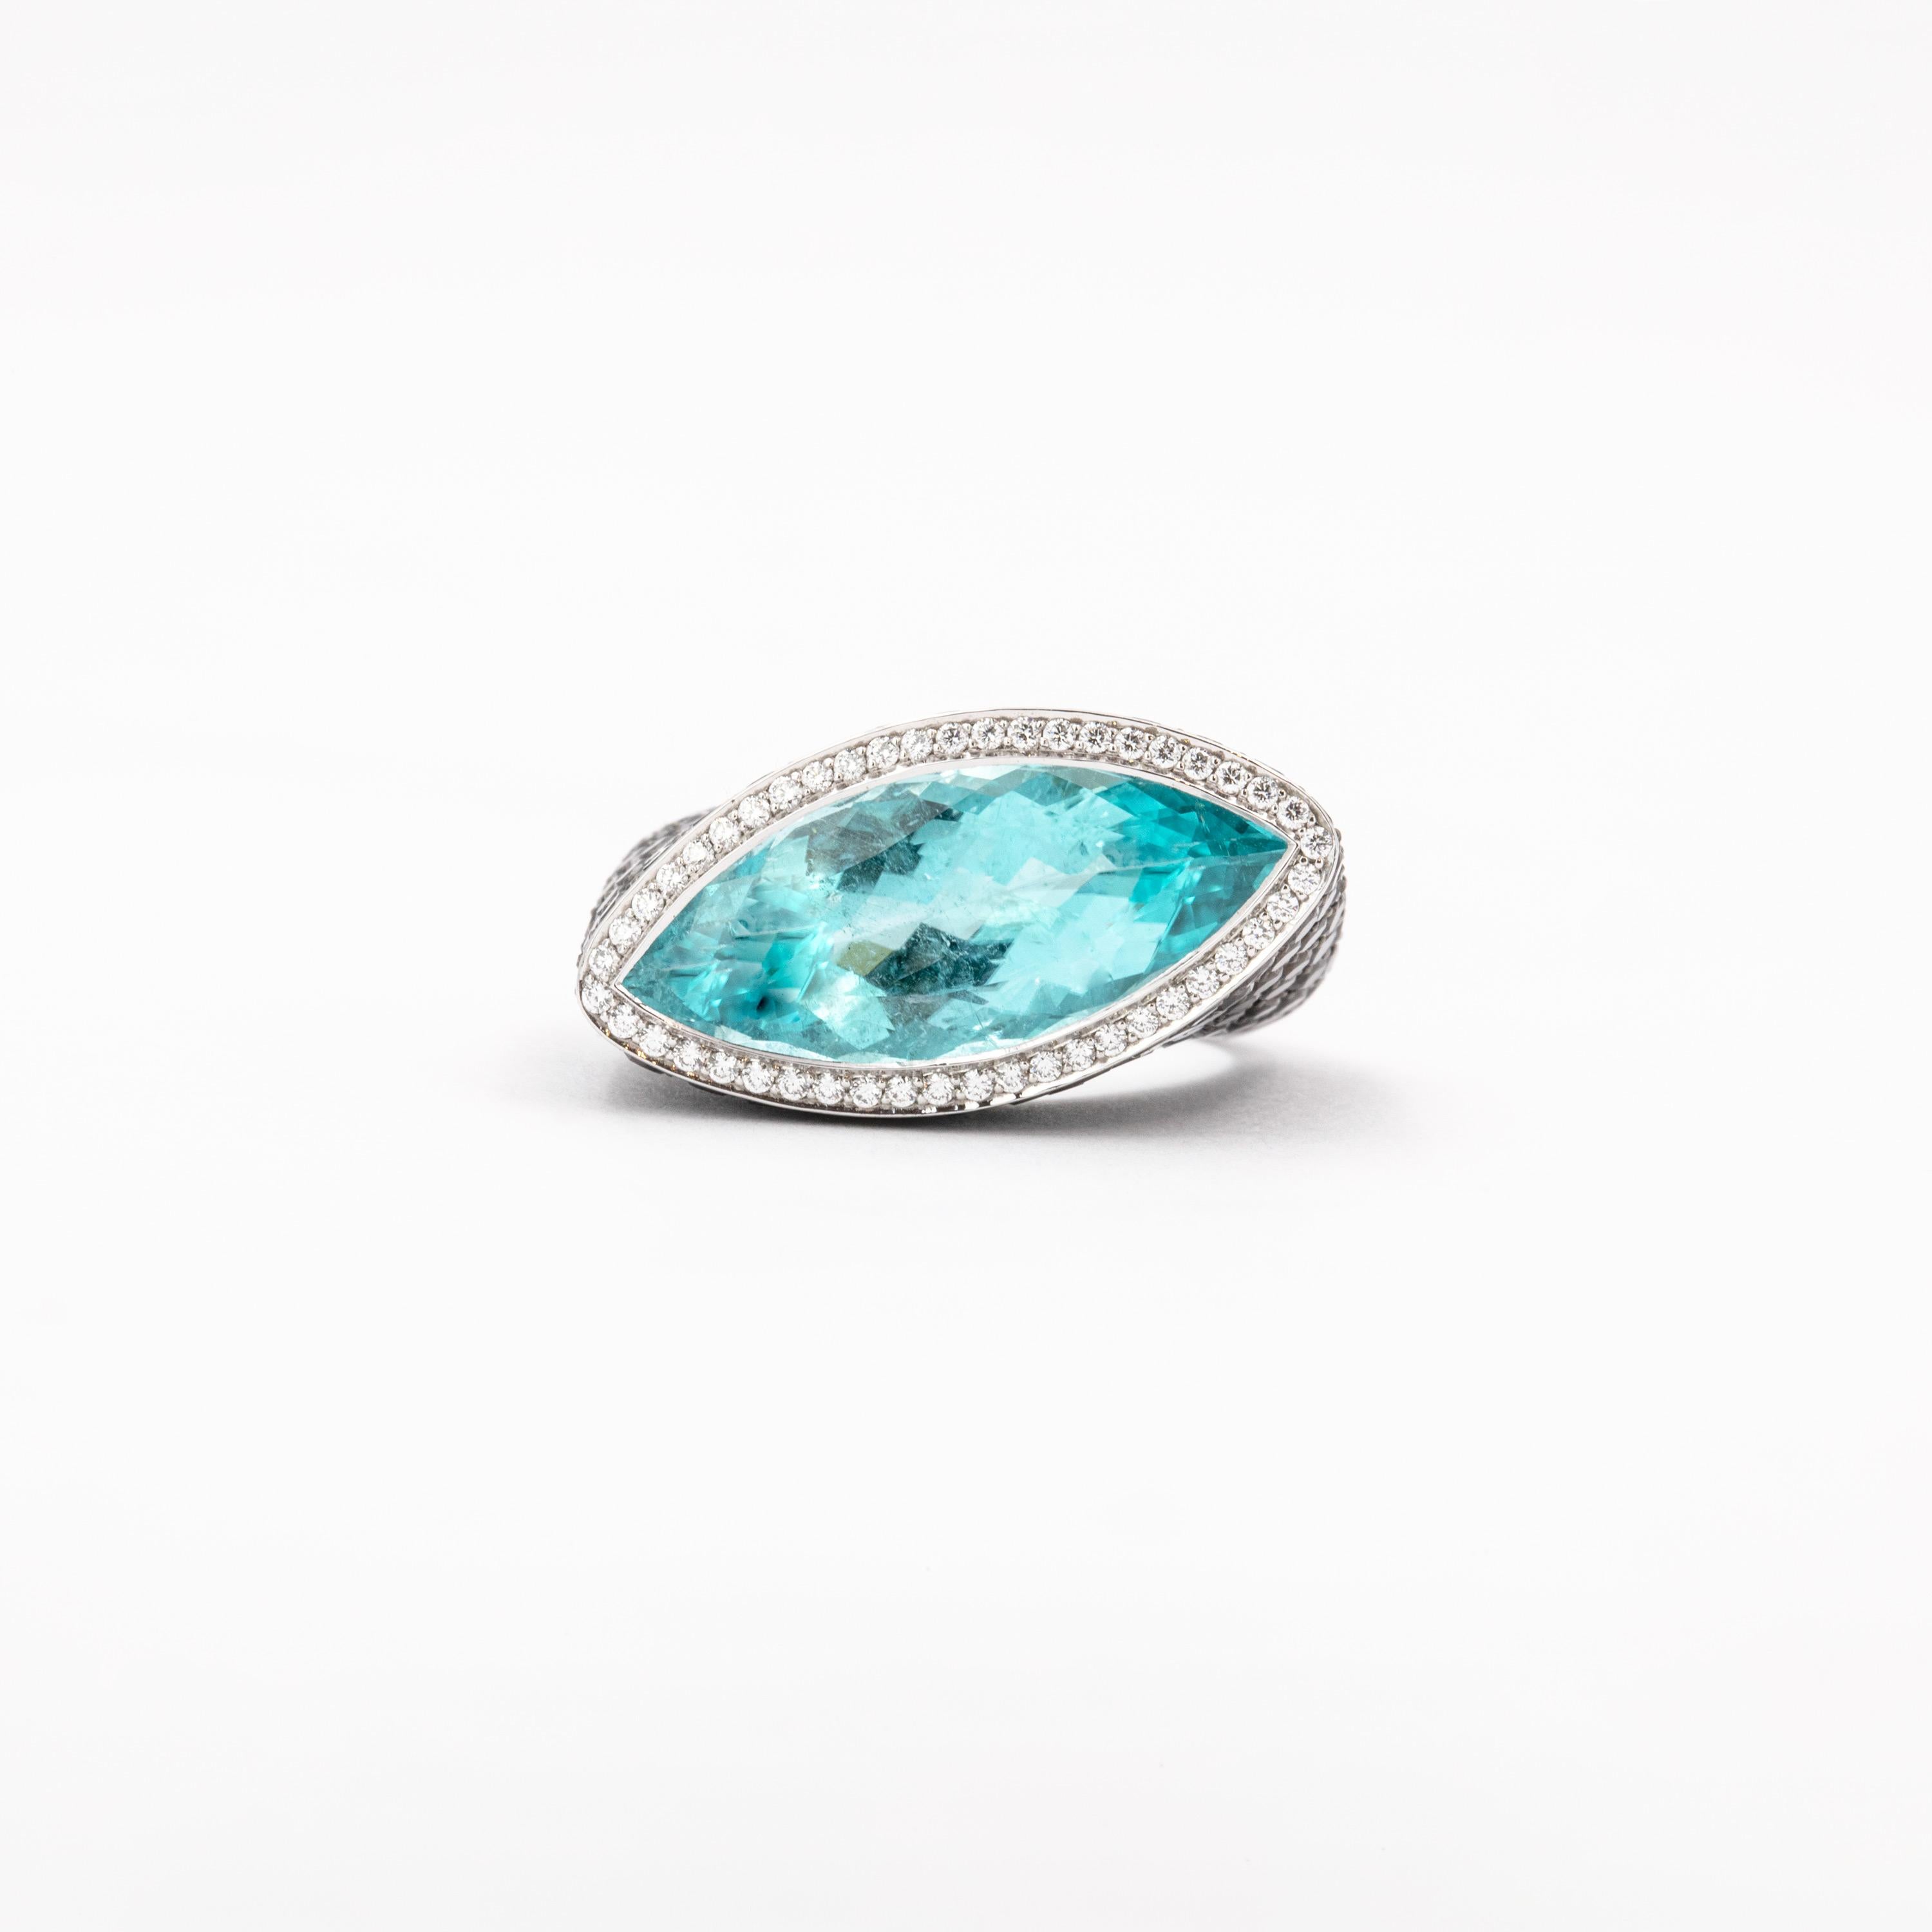 A slightly twisted shank studded with 152 black diamonds weighing 3.44 carats highlights the 7.22 carat marquise-shaped Paraiba Tourmaline. The vibrant center stone is set with a halo of 47 white, round brilliant-cut diamonds (F / VVS), which